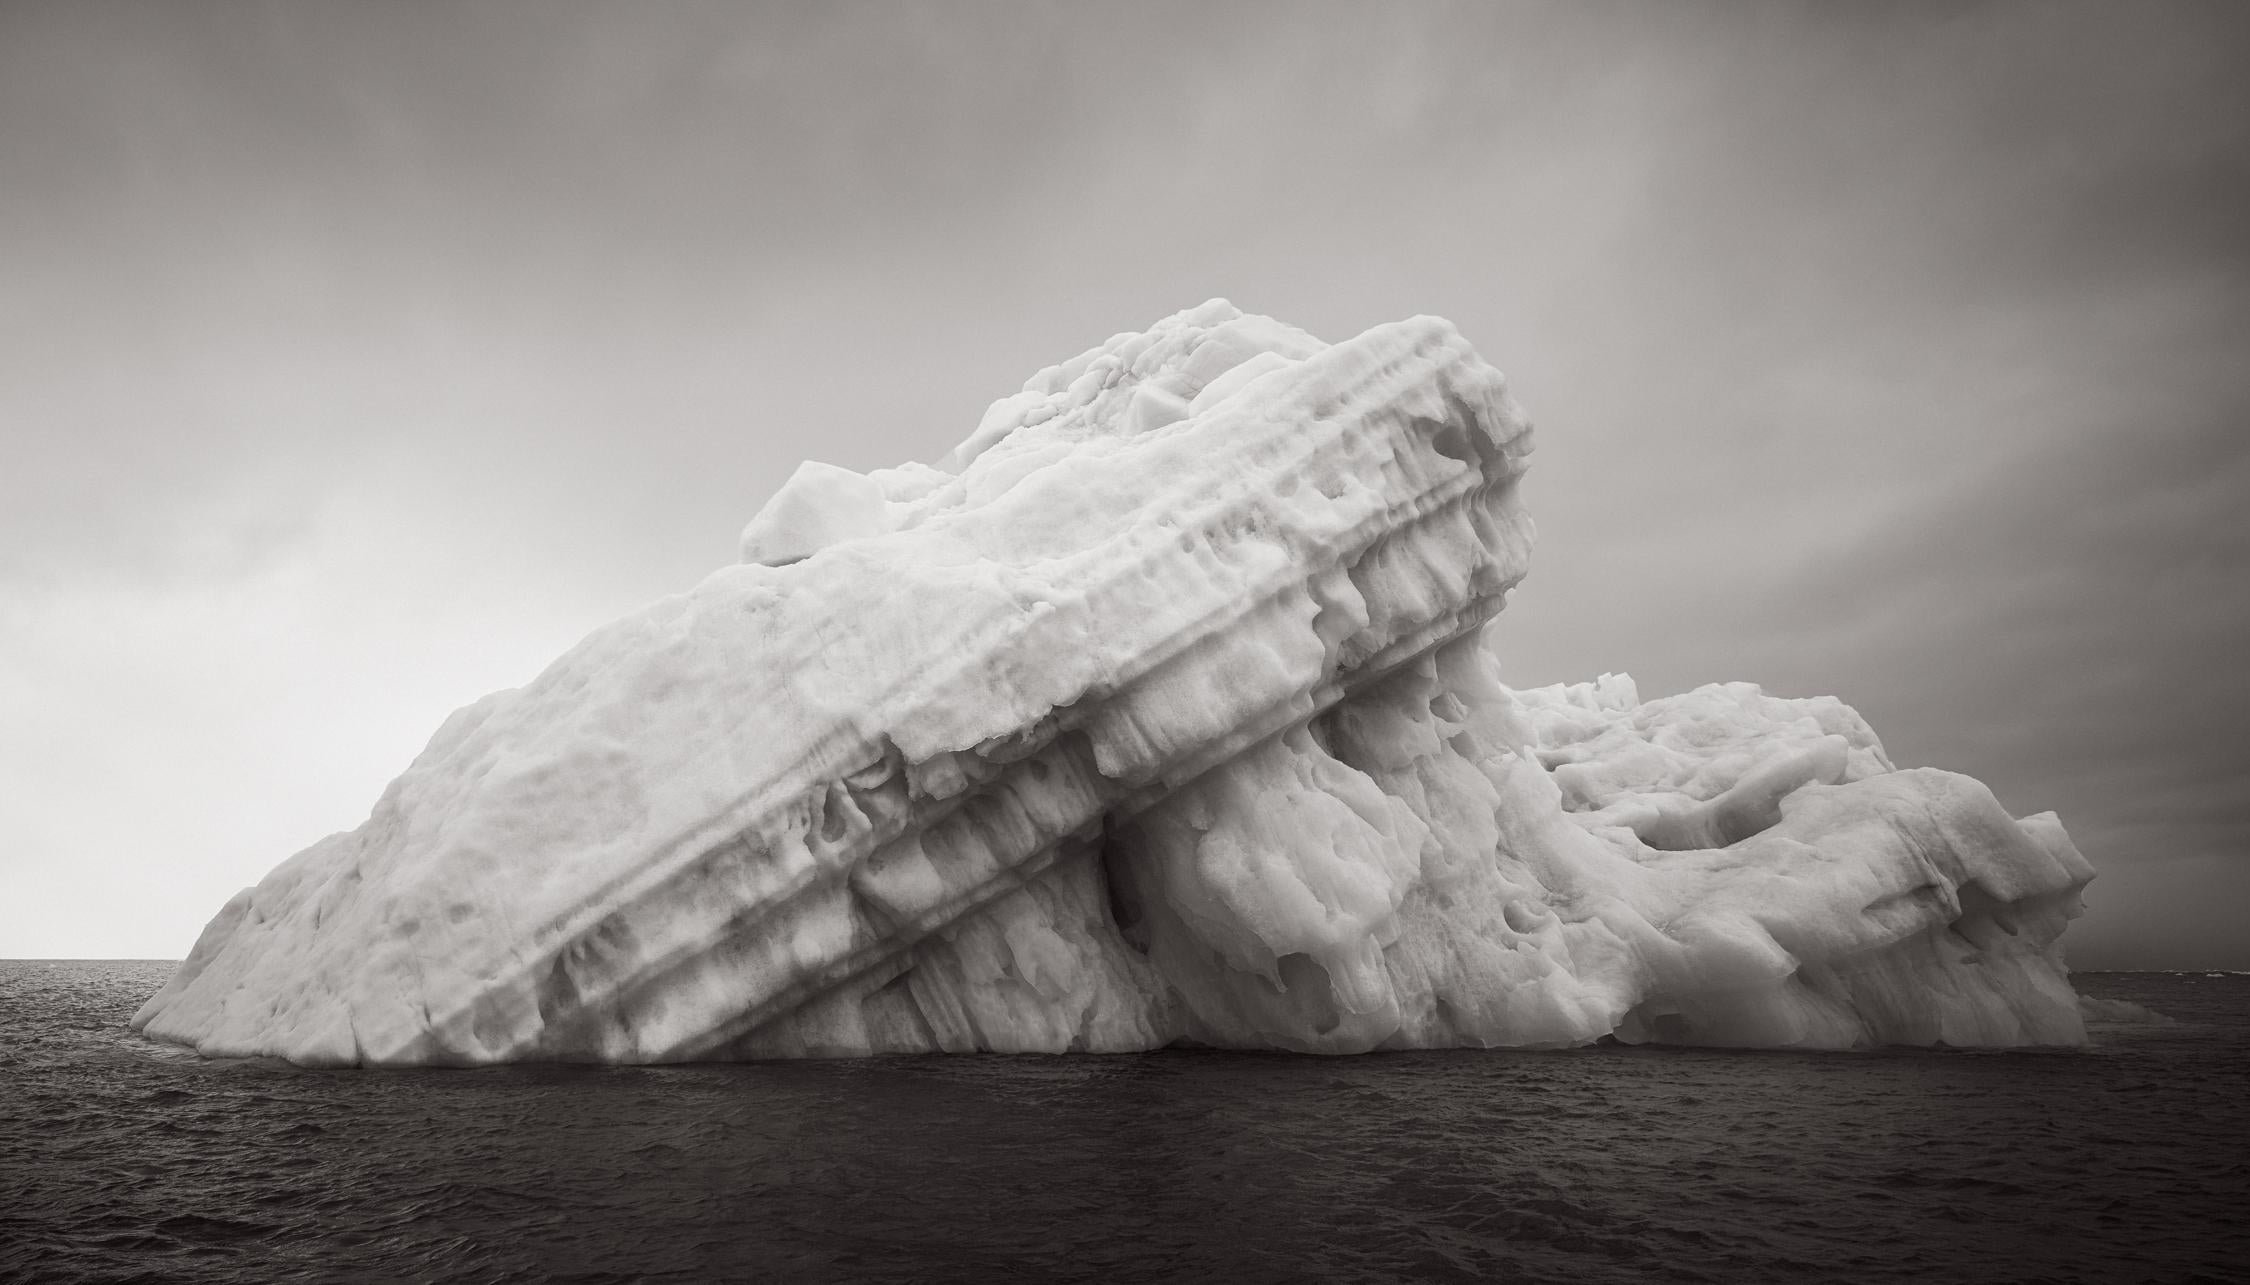 Drew Doggett Black and White Photograph - In the Arctic, the water creates unique forms of ice molded and reformed by time